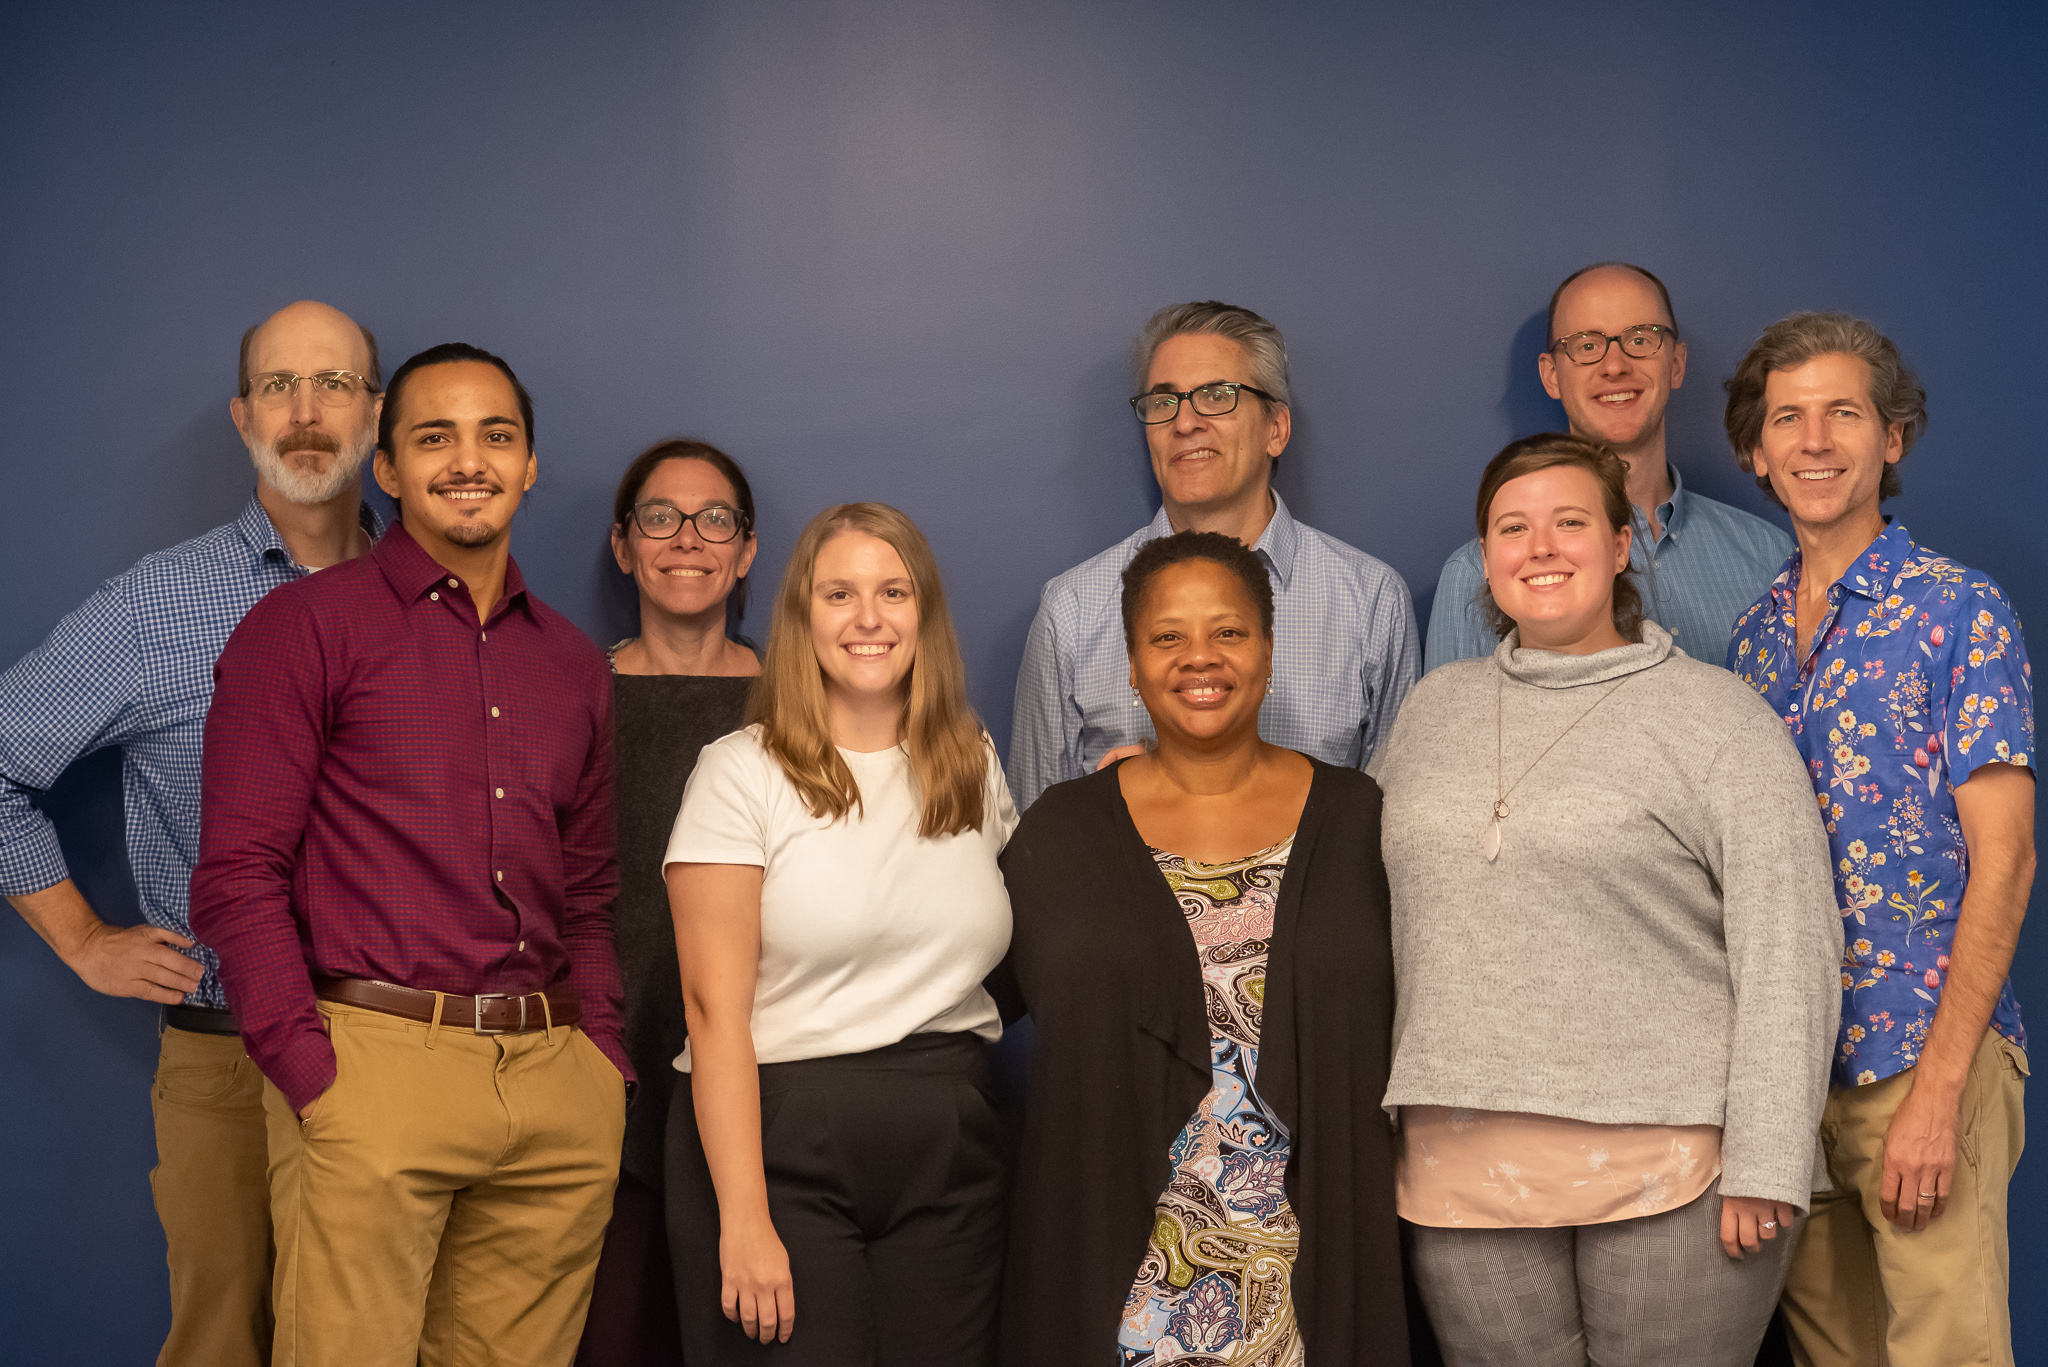 Nine staff members of the Georgetown Climate Center smile and pose for the camera against a blue background. 